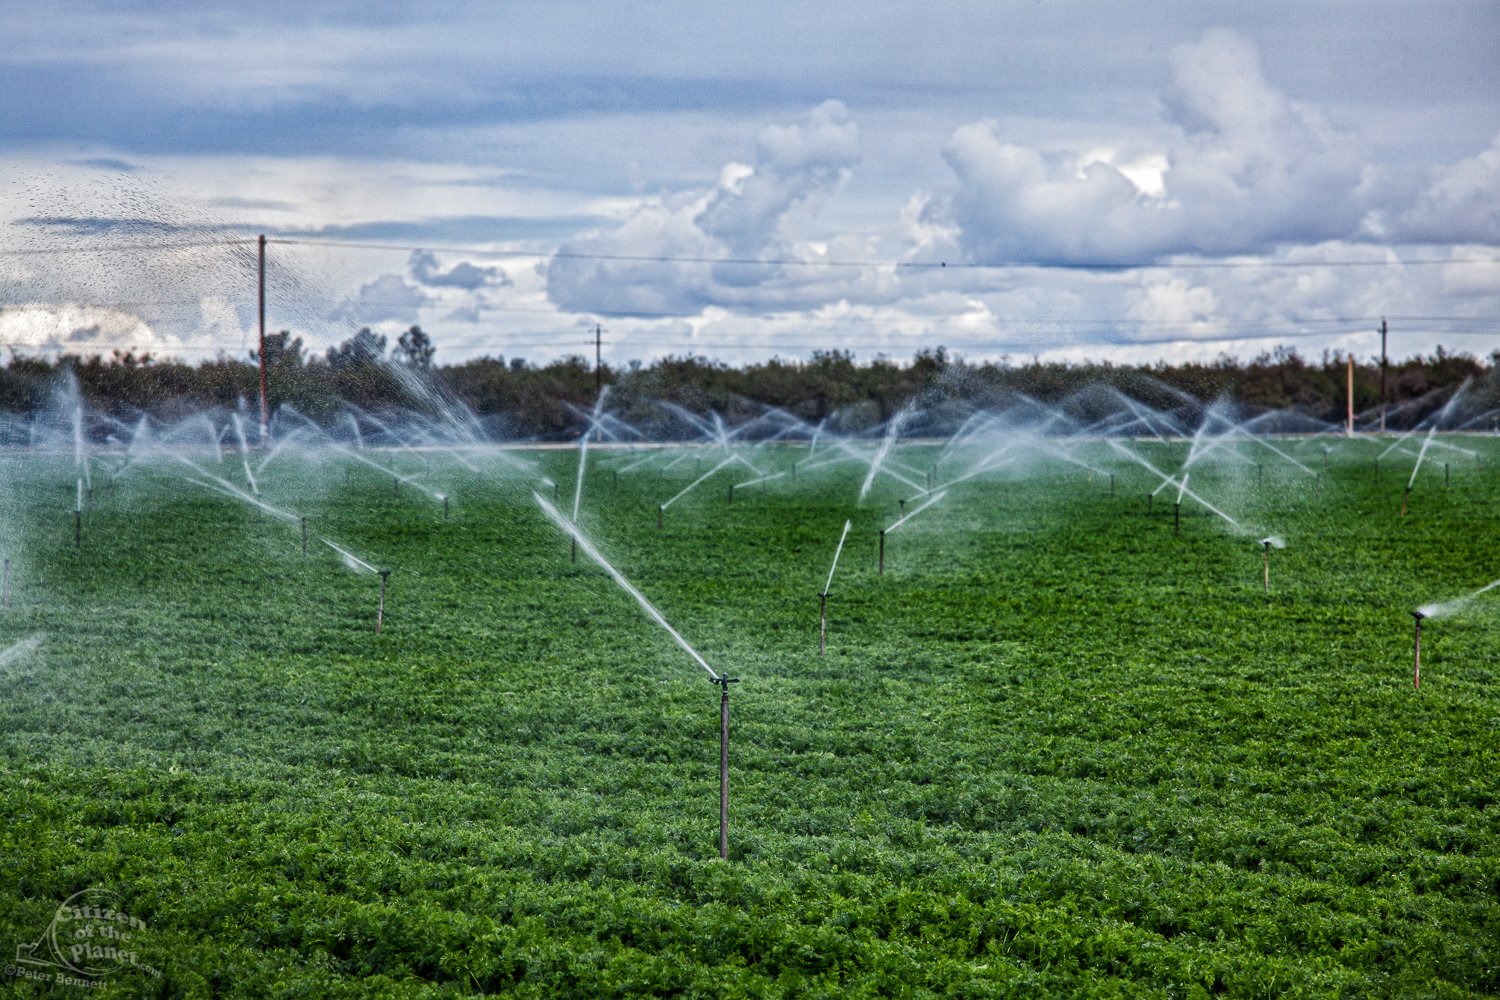  Crops being irrigated during drought in Kern County. 